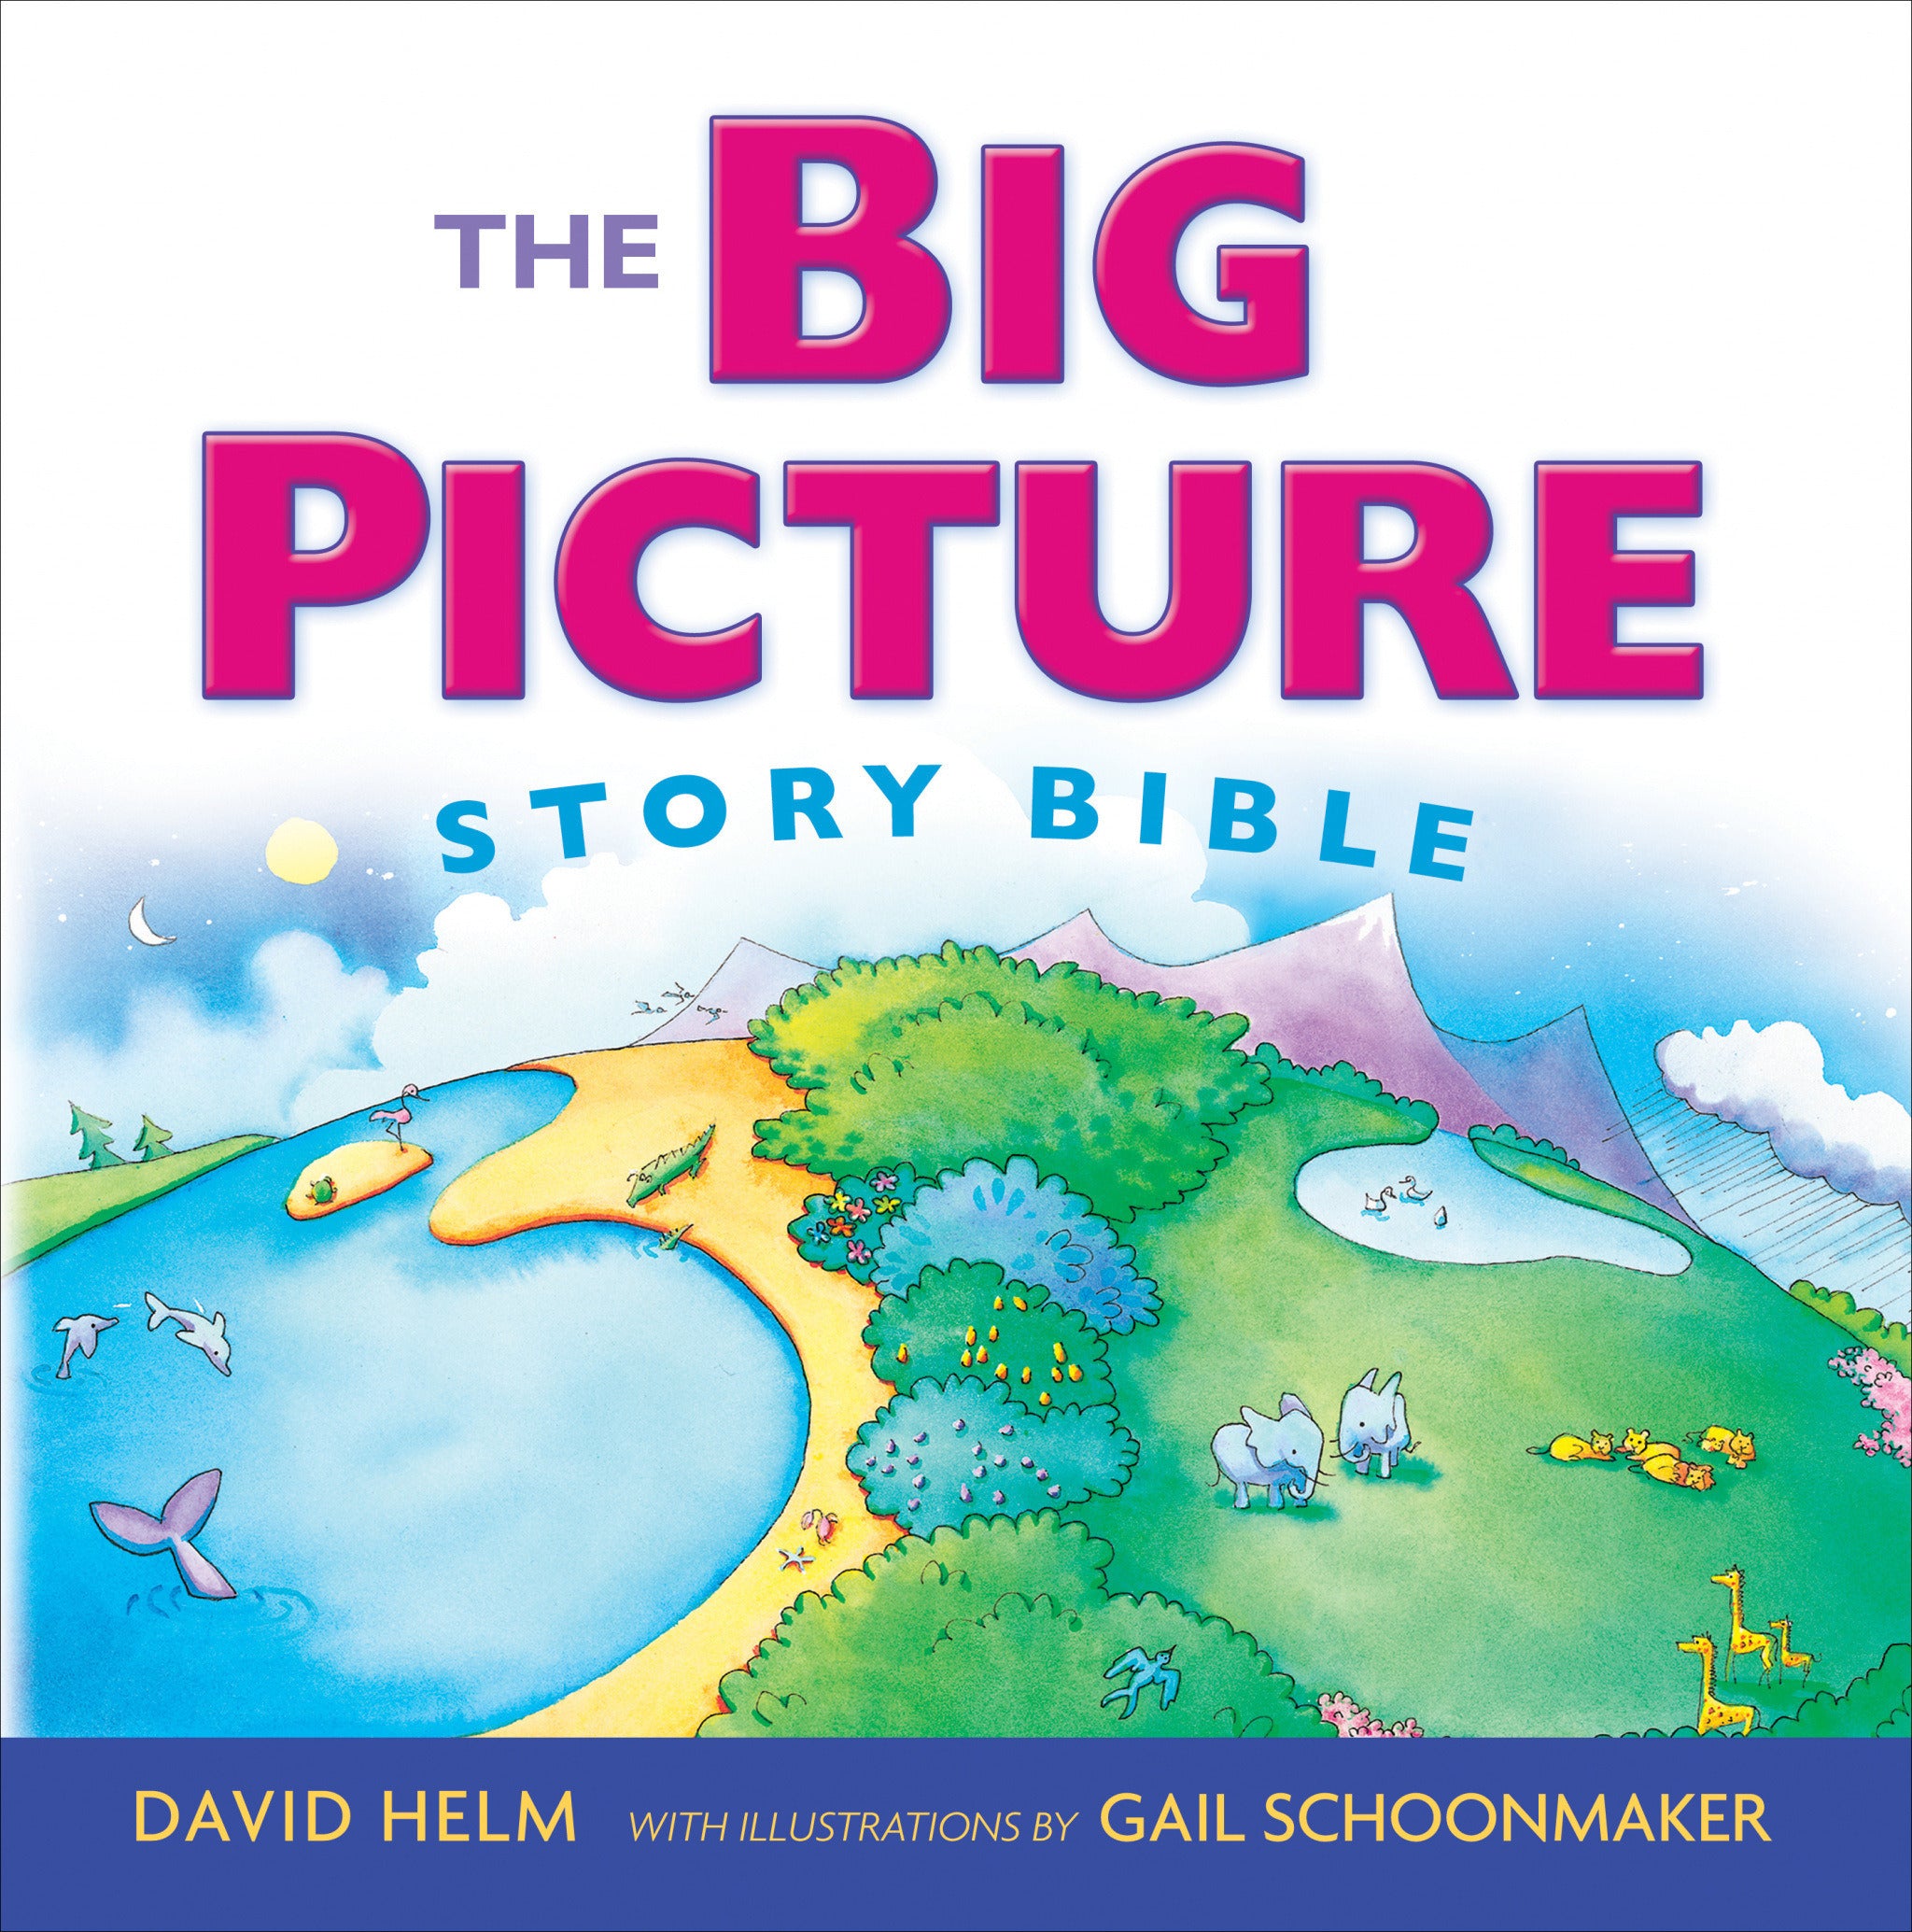 Image of The Big Picture Story Bible other